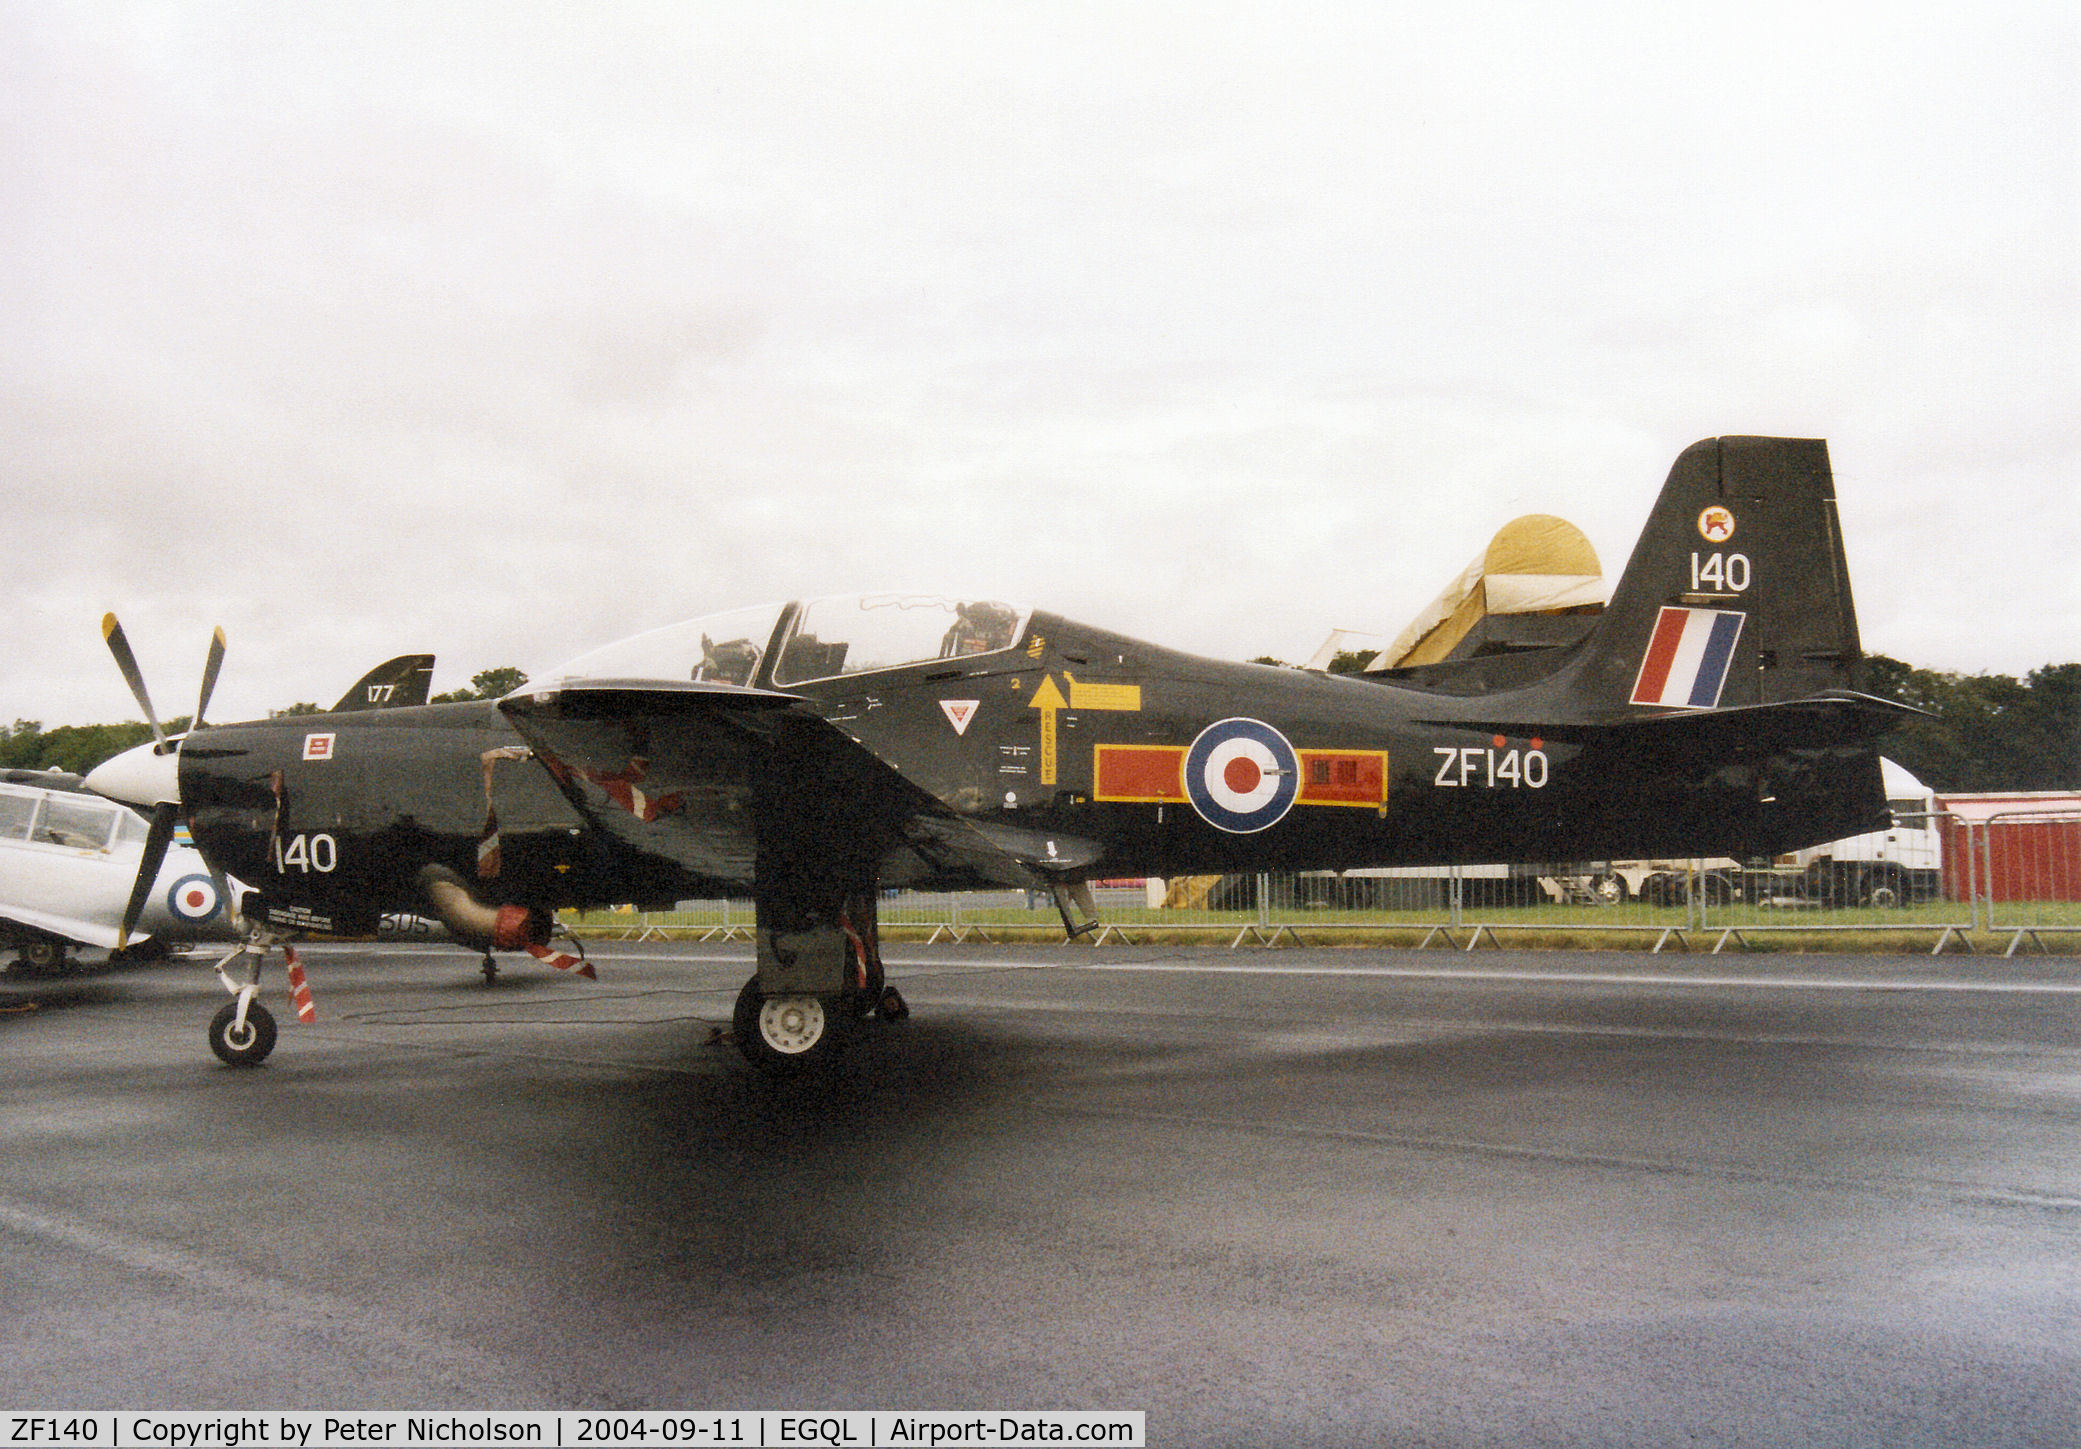 ZF140, 1988 Short S-312 Tucano T1 C/N S006/T6, Tucano T.1, callsign Blade 1, of 207[Reserve] Squadron on display at the 2004 RAF Leuchars Airshow.